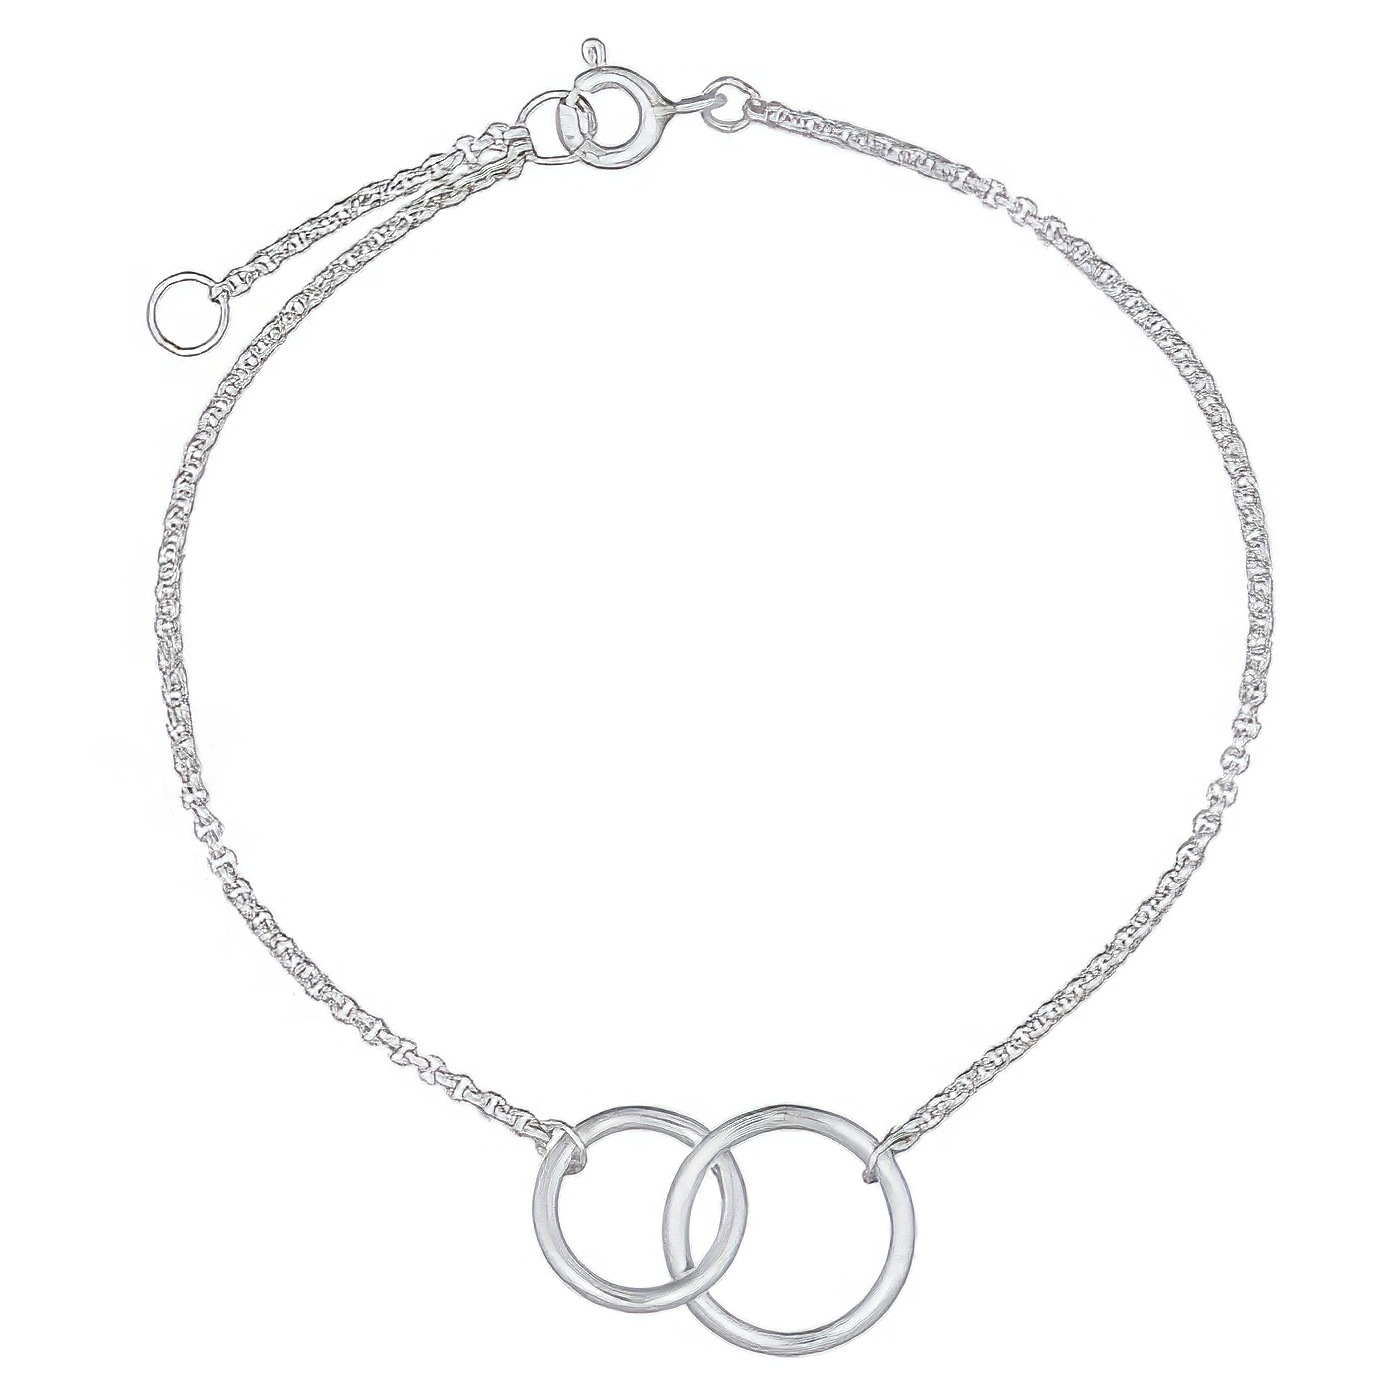 Hanging Circles Silver 925 Rollo Chain Bracelet 